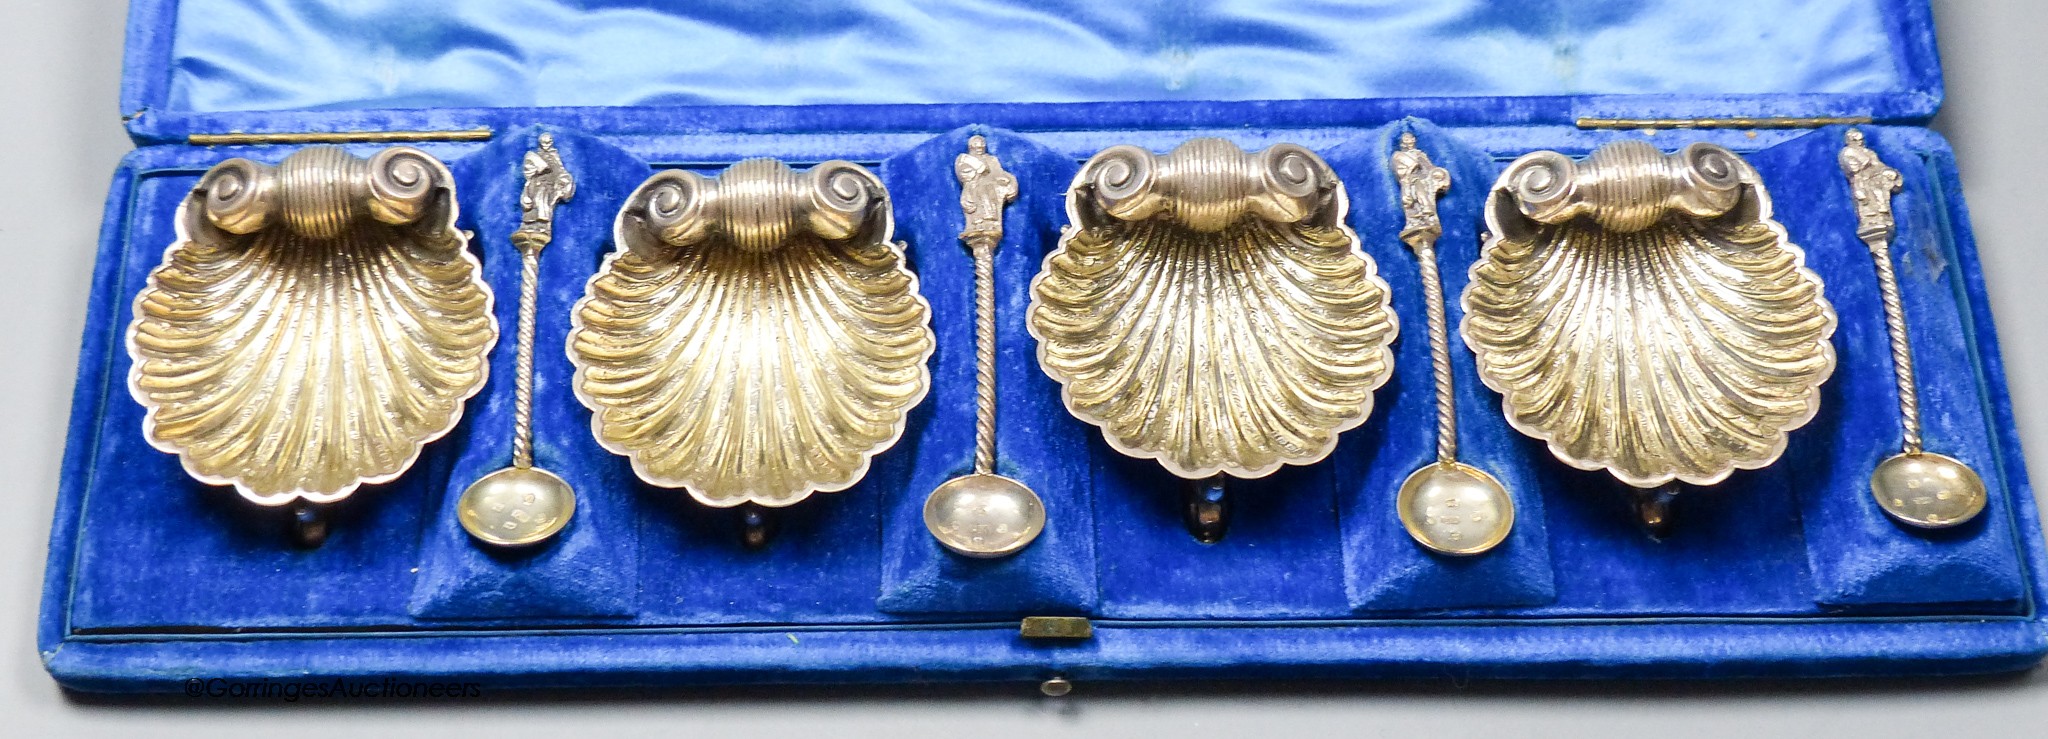 A cased set of four Victorian silver scallop shell salts, on dolphin feet, with four matching apostle salt spoons, Henry Hyde Aston, Birmingham, 1862, 67mm, 6.5oz.